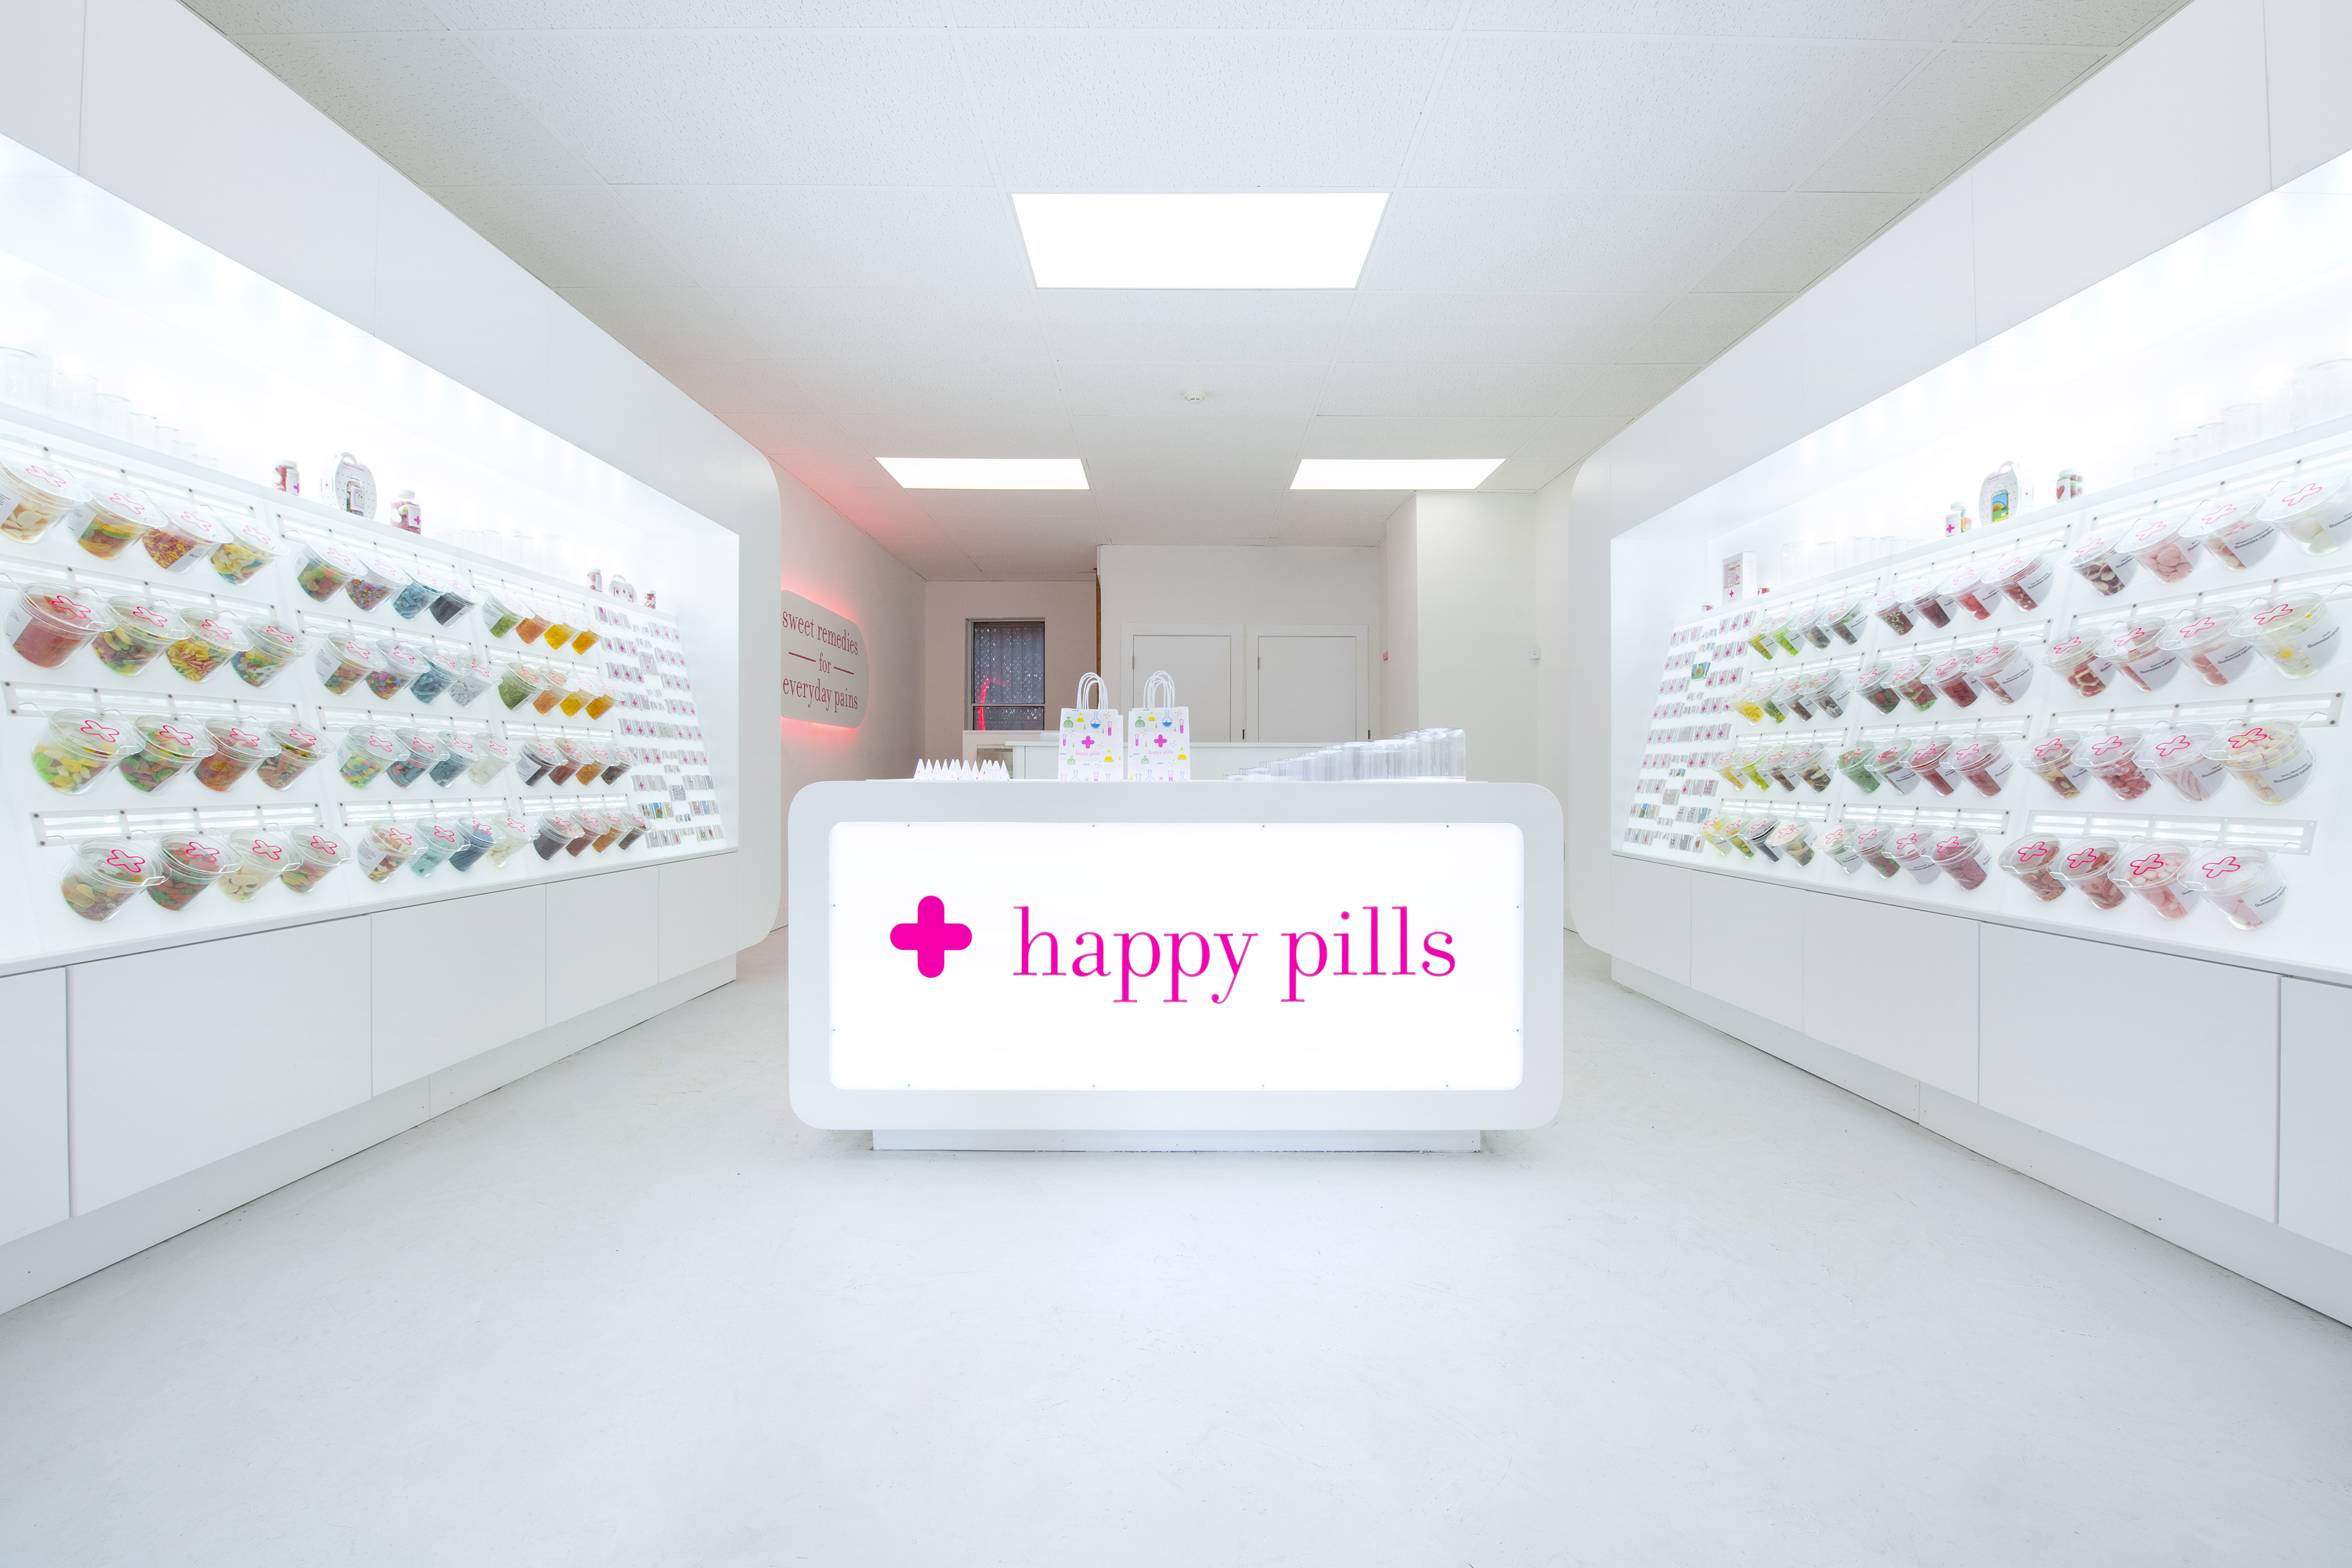 Interior of a bright white candy store with a pharmacy theme. A counter in the middle has a pink logo that reads “Happy Pills,” and each wall is lined with bulk candy containers.